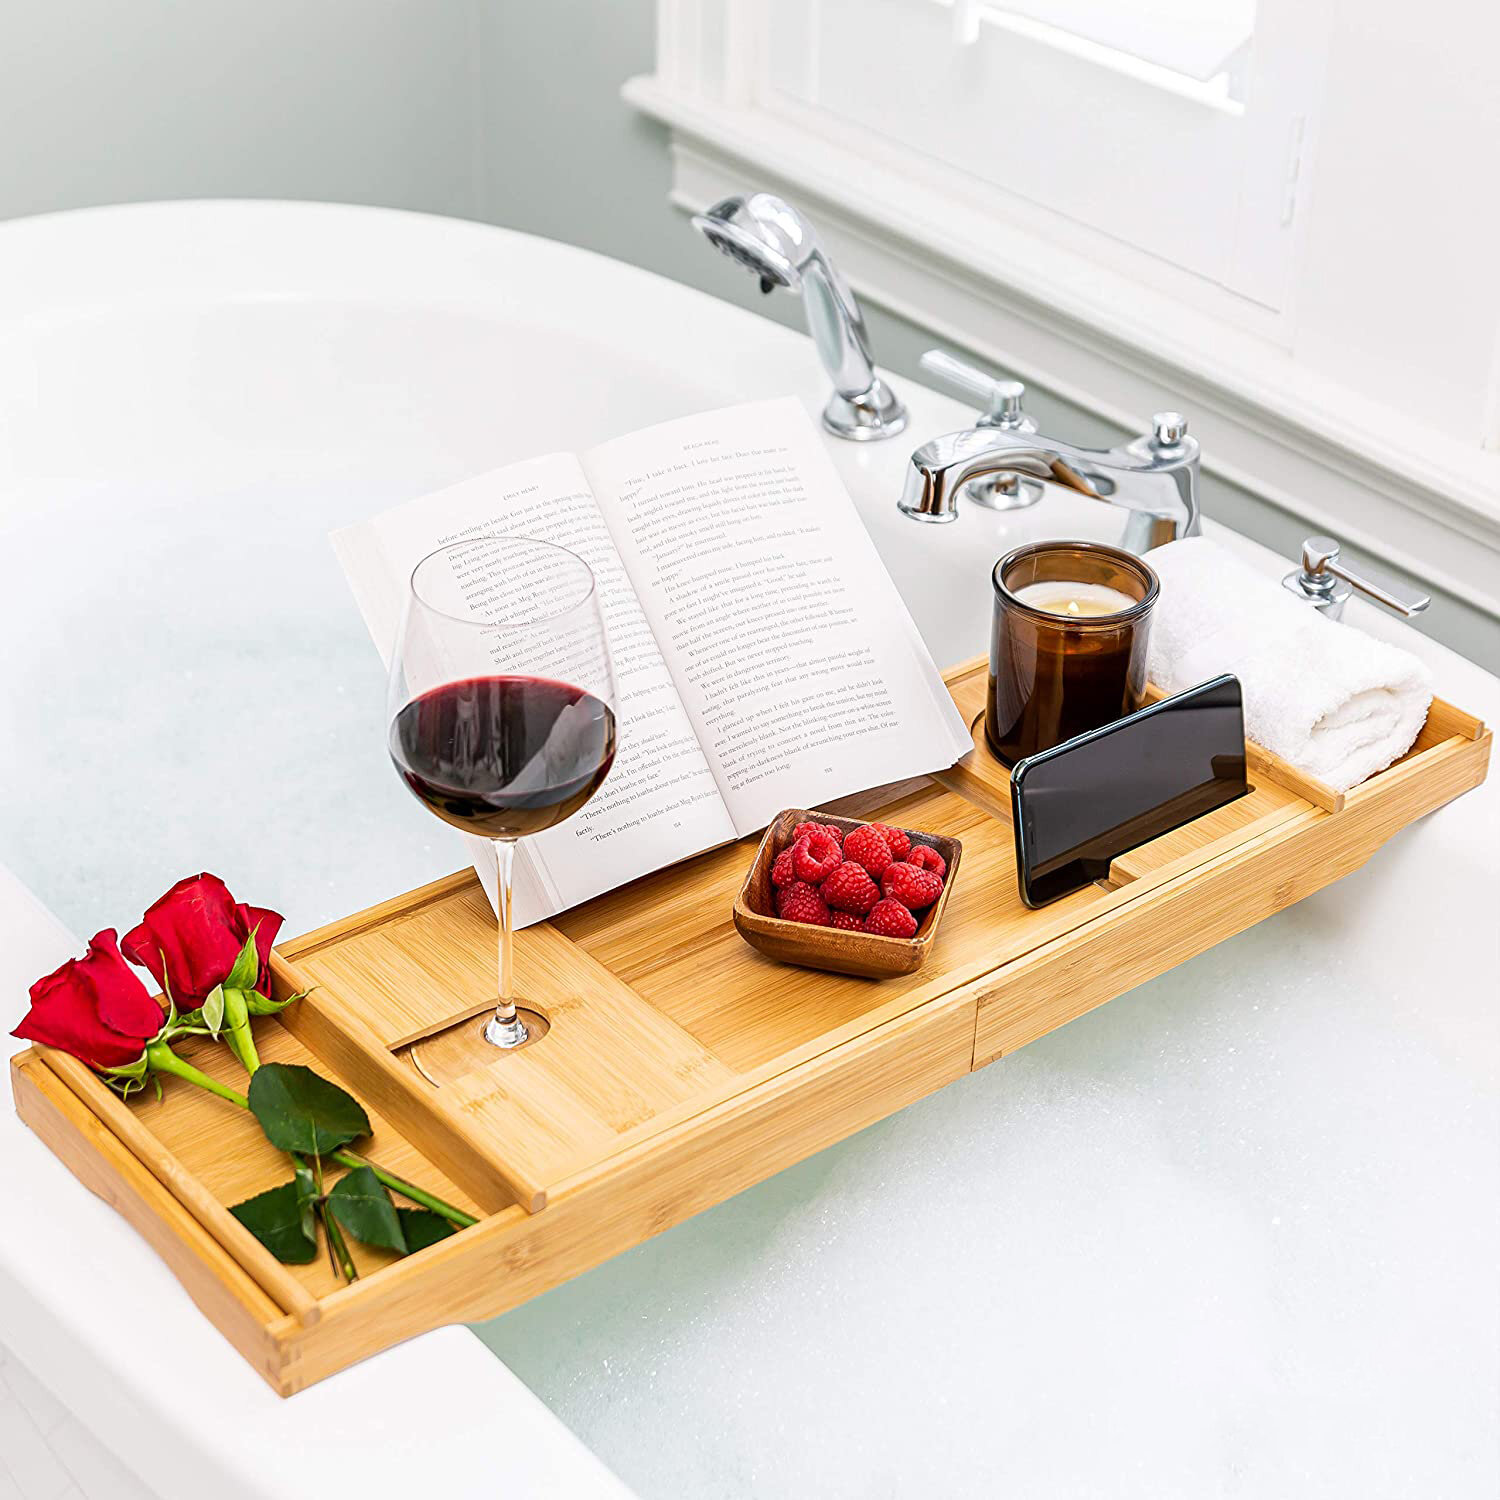 Bath Caddy Tray for Tub: Bamboo Bathtub Tray Caddy Expandable with Wine  Glass Holder and Book Stand. Luxury Bubble Bath Accessories & Spa Decor.  Self